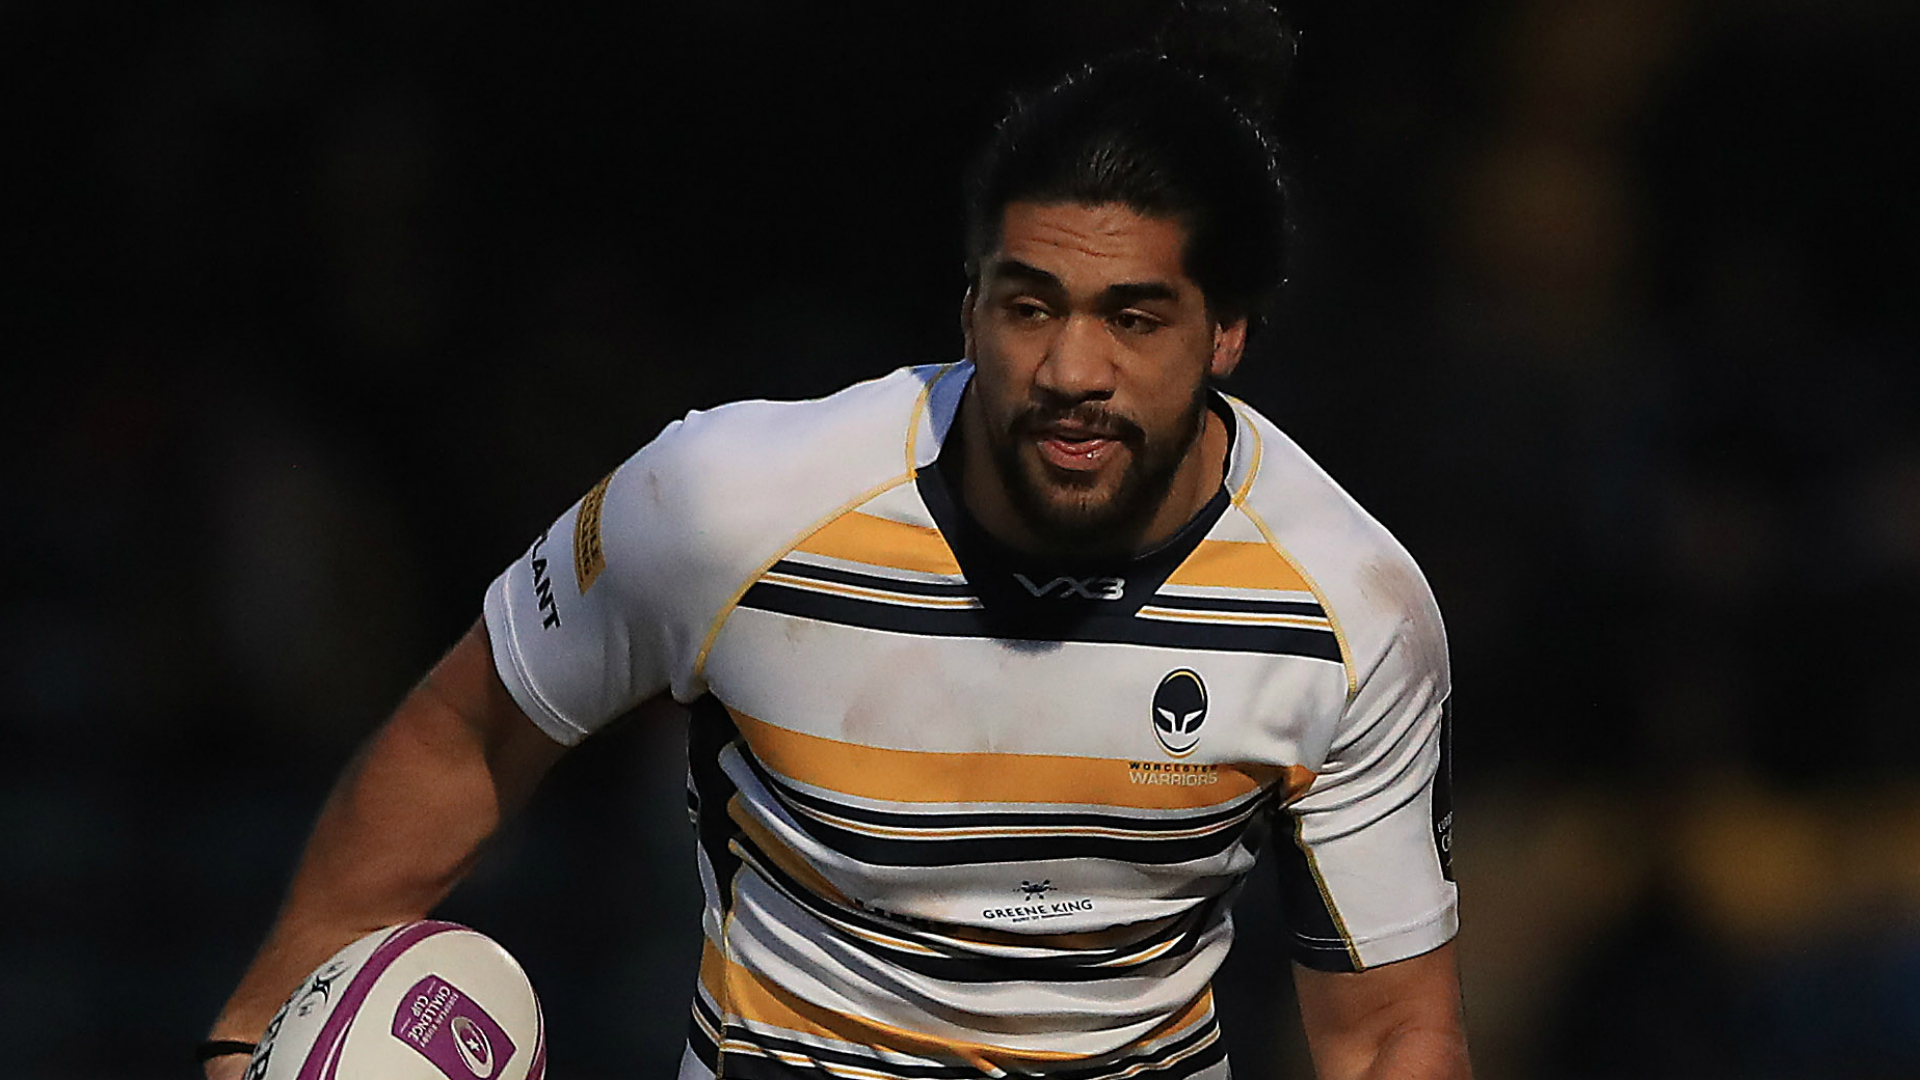 Worcester Warriors posted an update on Michael Fatialofa, while Saracens announced a pledge towards his recovery fund.